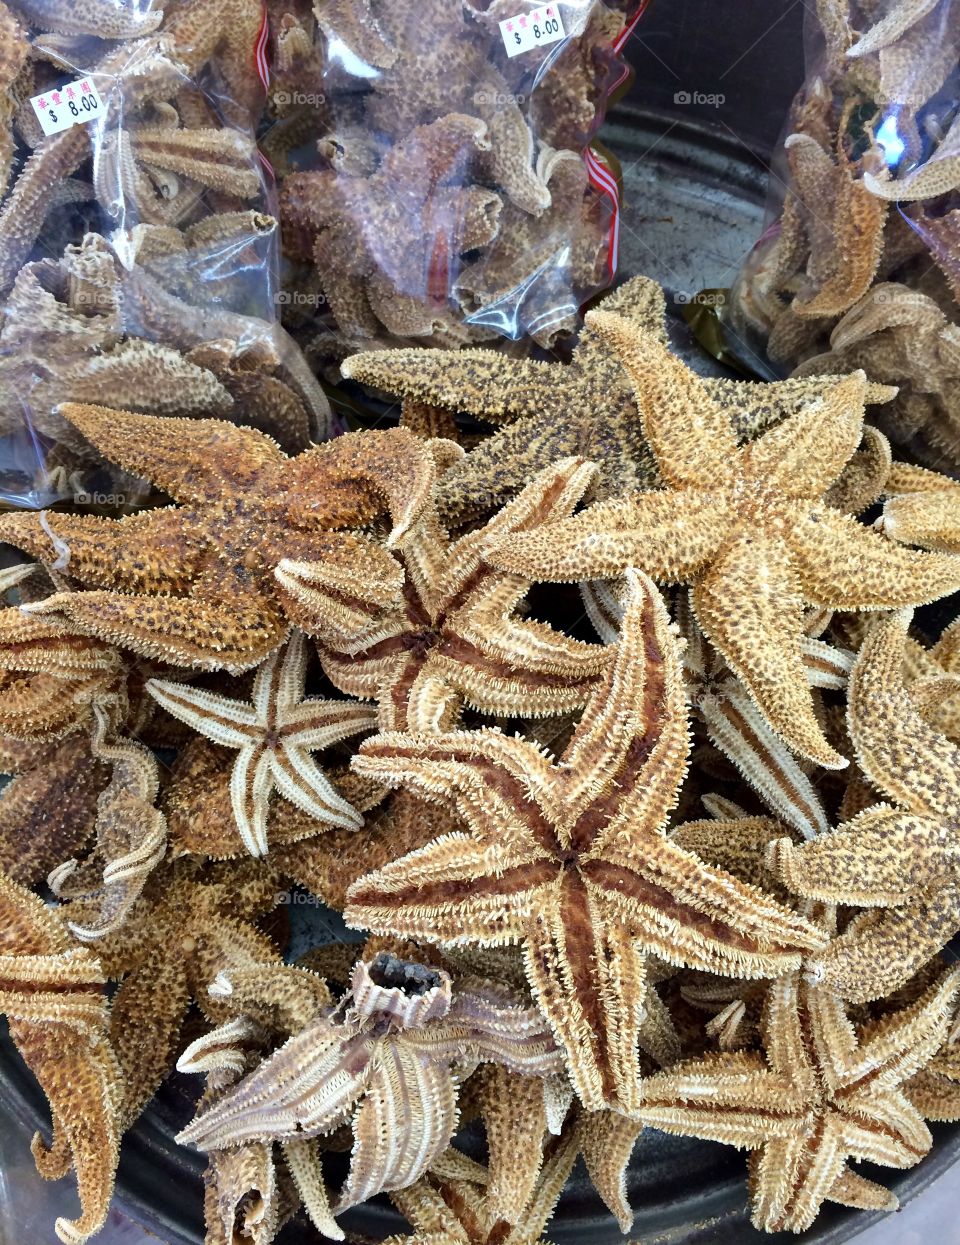 Starfish for sale in shop